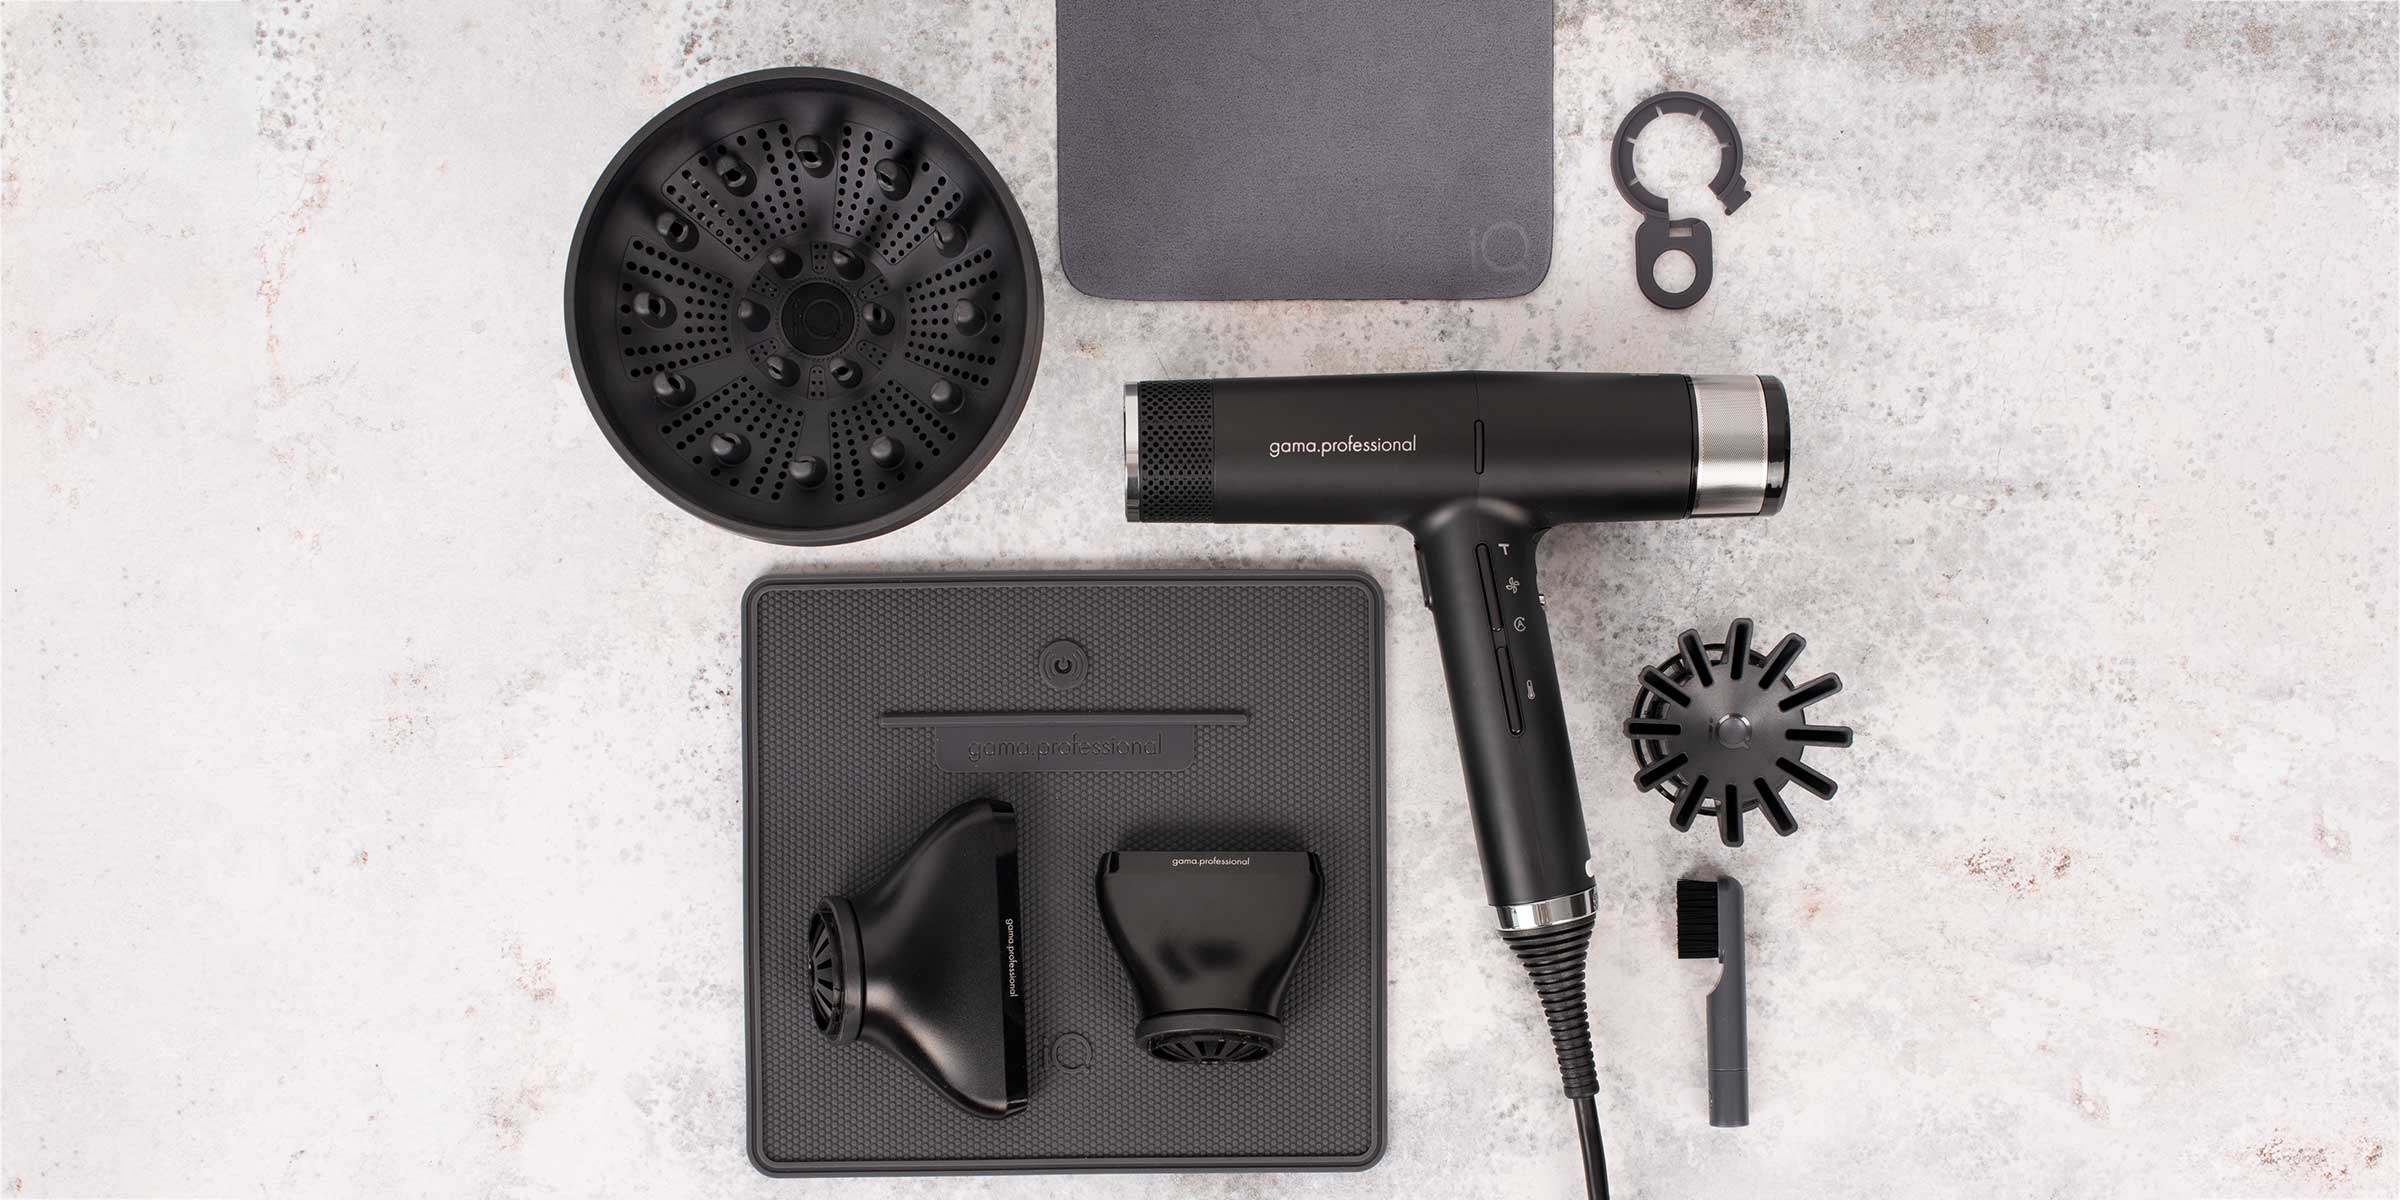 iq 2 hair dryer and accesories